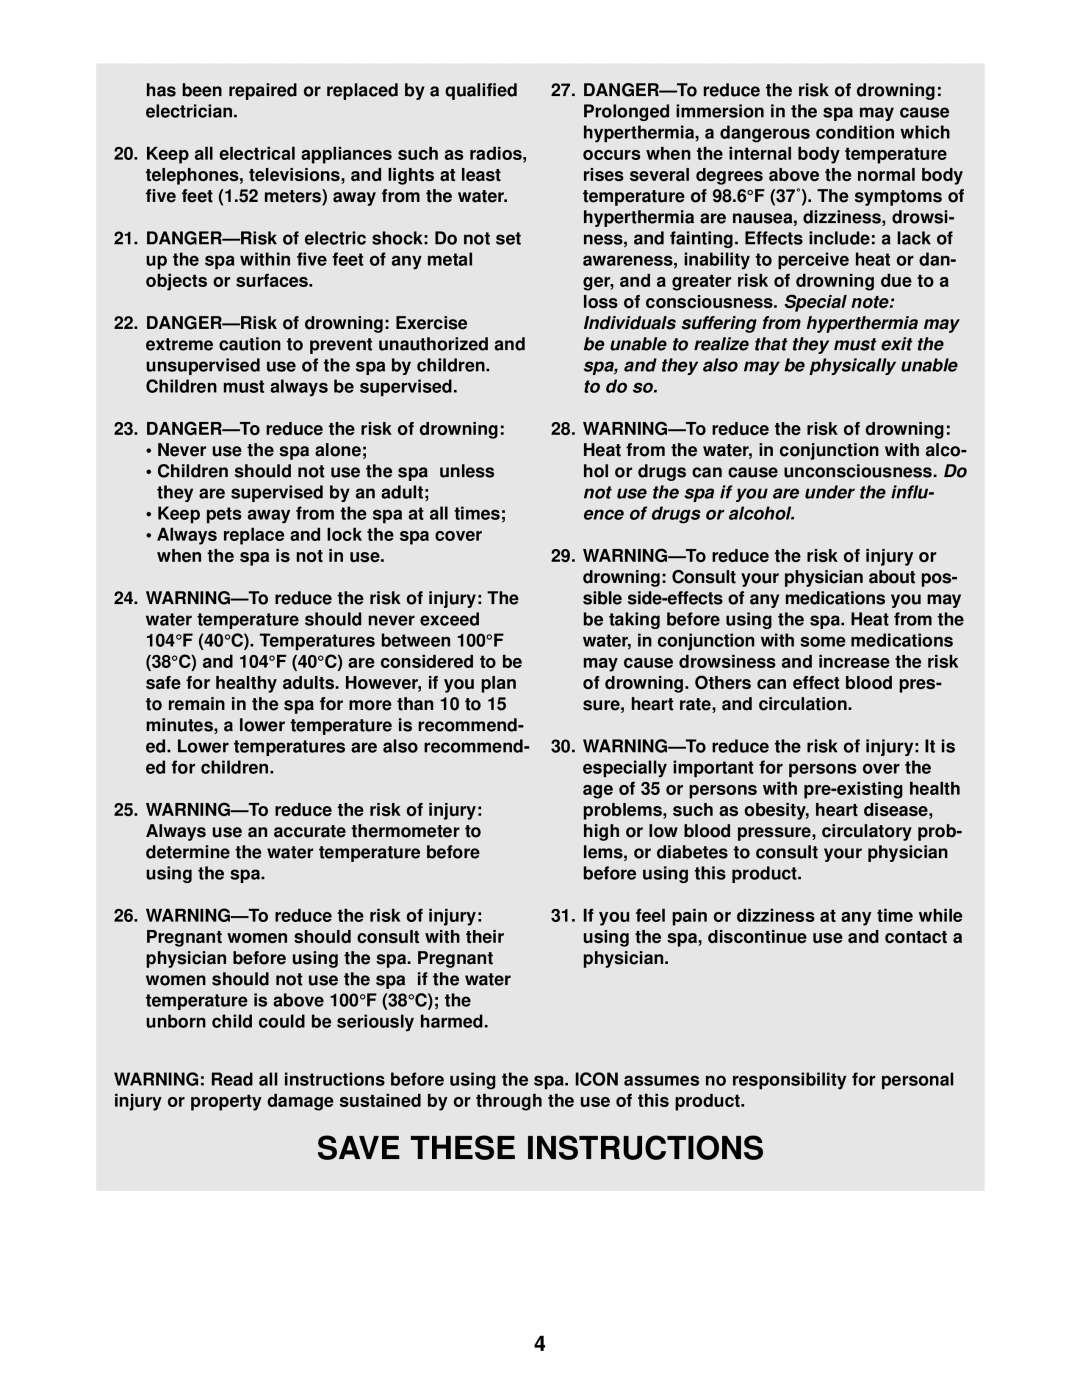 Image 831.10815 Save These Instructions, has been repaired or replaced by a qualified electrician, loss of consciousness 